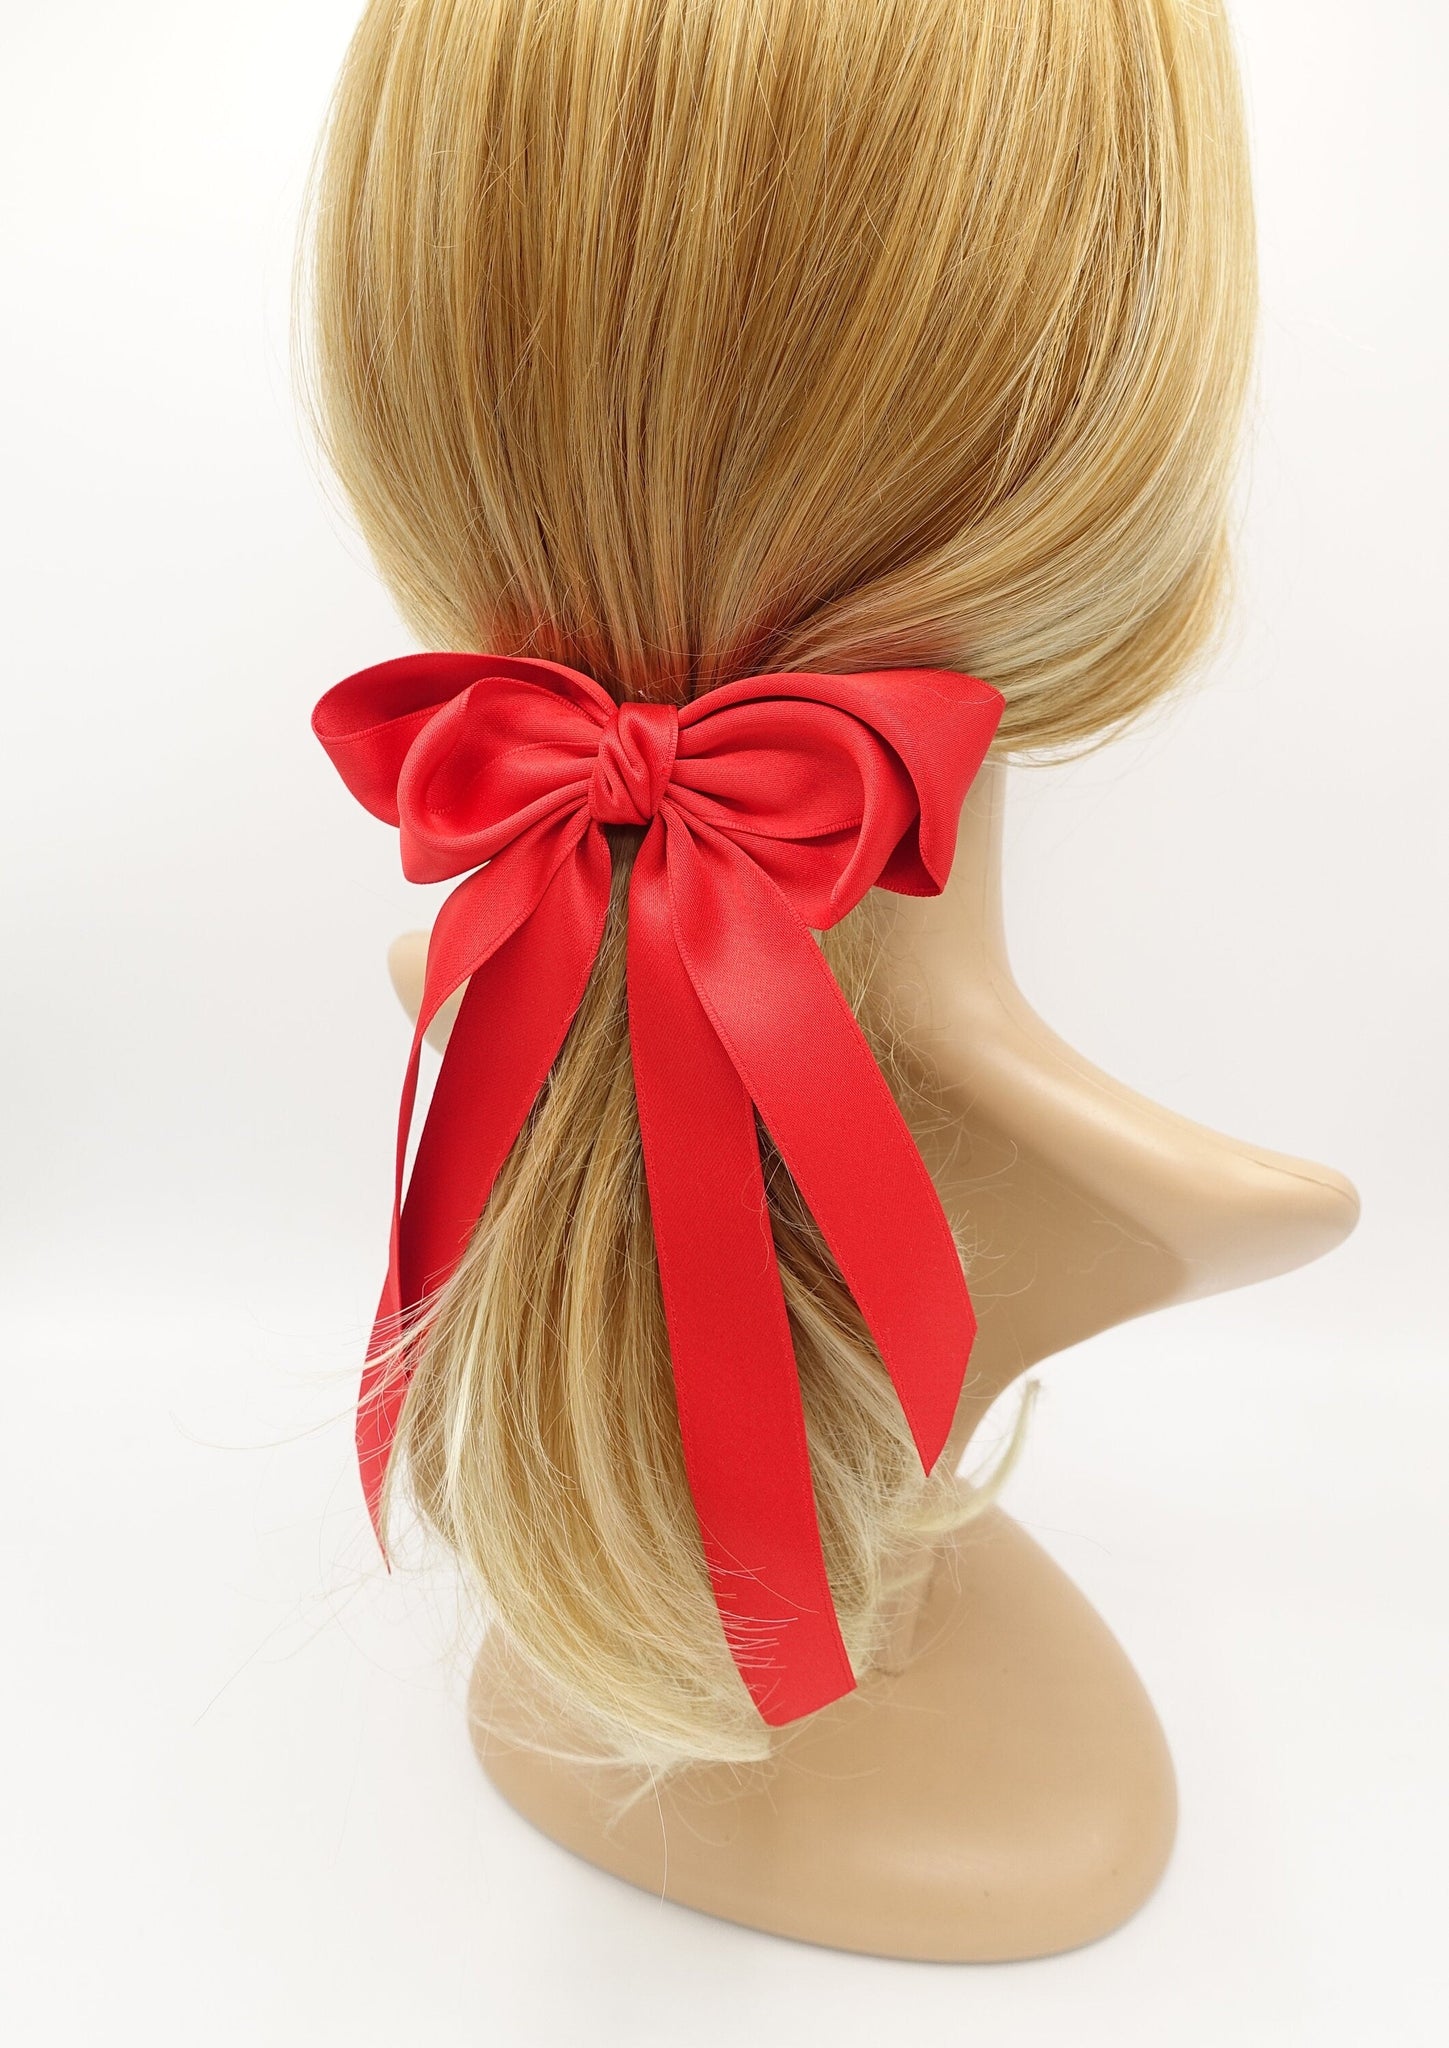 veryshine.com Barrette (Bow) Red satin hair bow layered double tail hair accessory for women